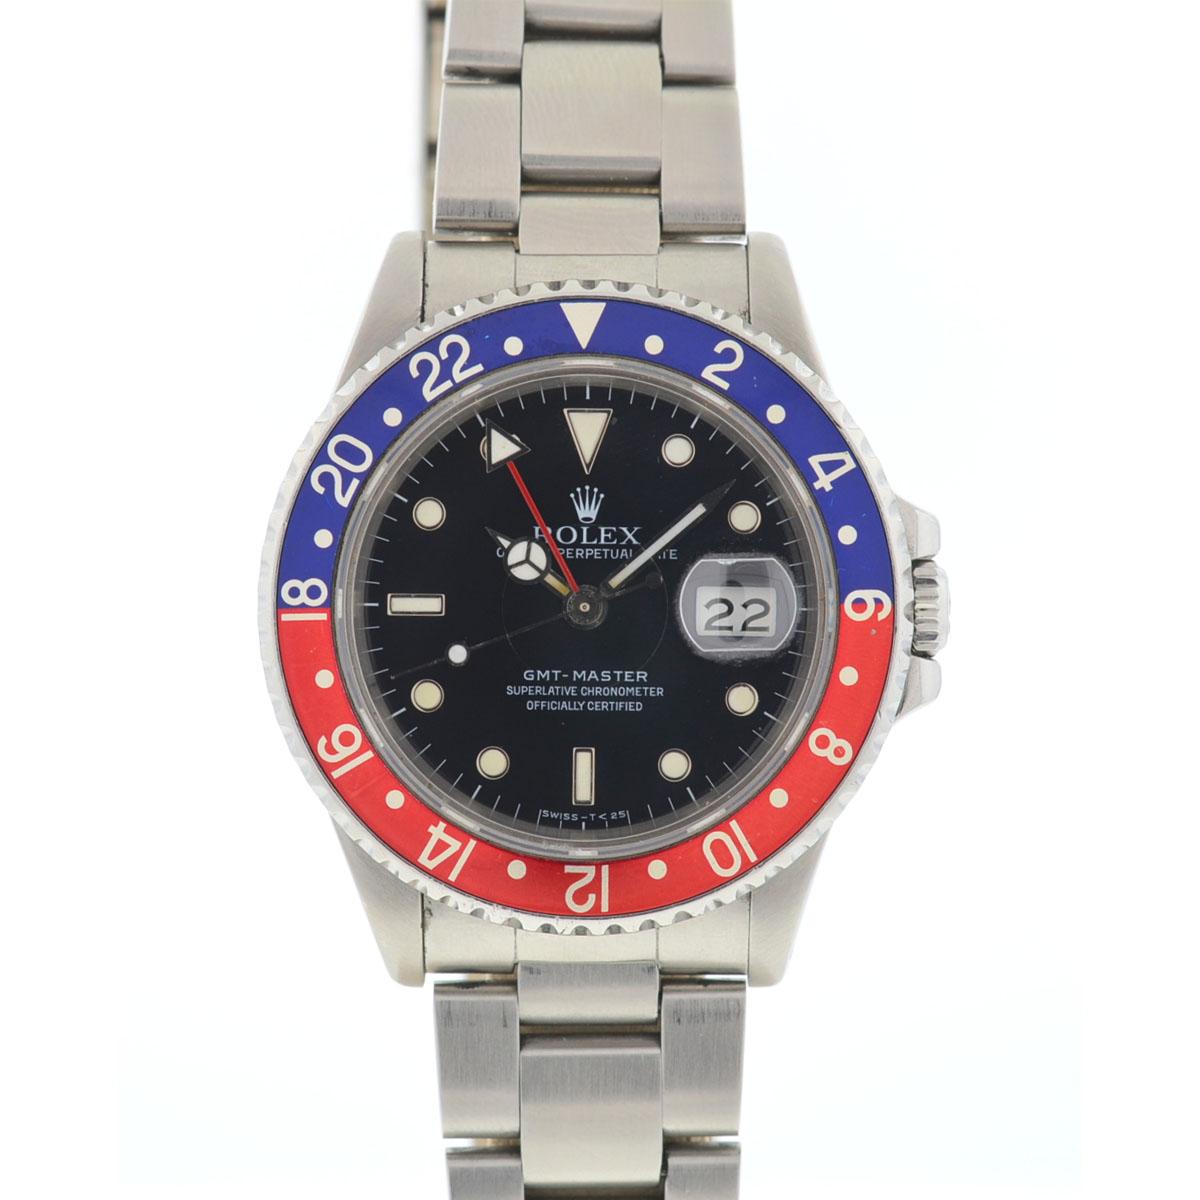 Company - Rolex
Model - 16700 GMT-Master
Case Metal - Stainless Steel
Case Measurement - 40mm
Bracelet - Stainless Steel - Fits Wrist Size - 7 1/4